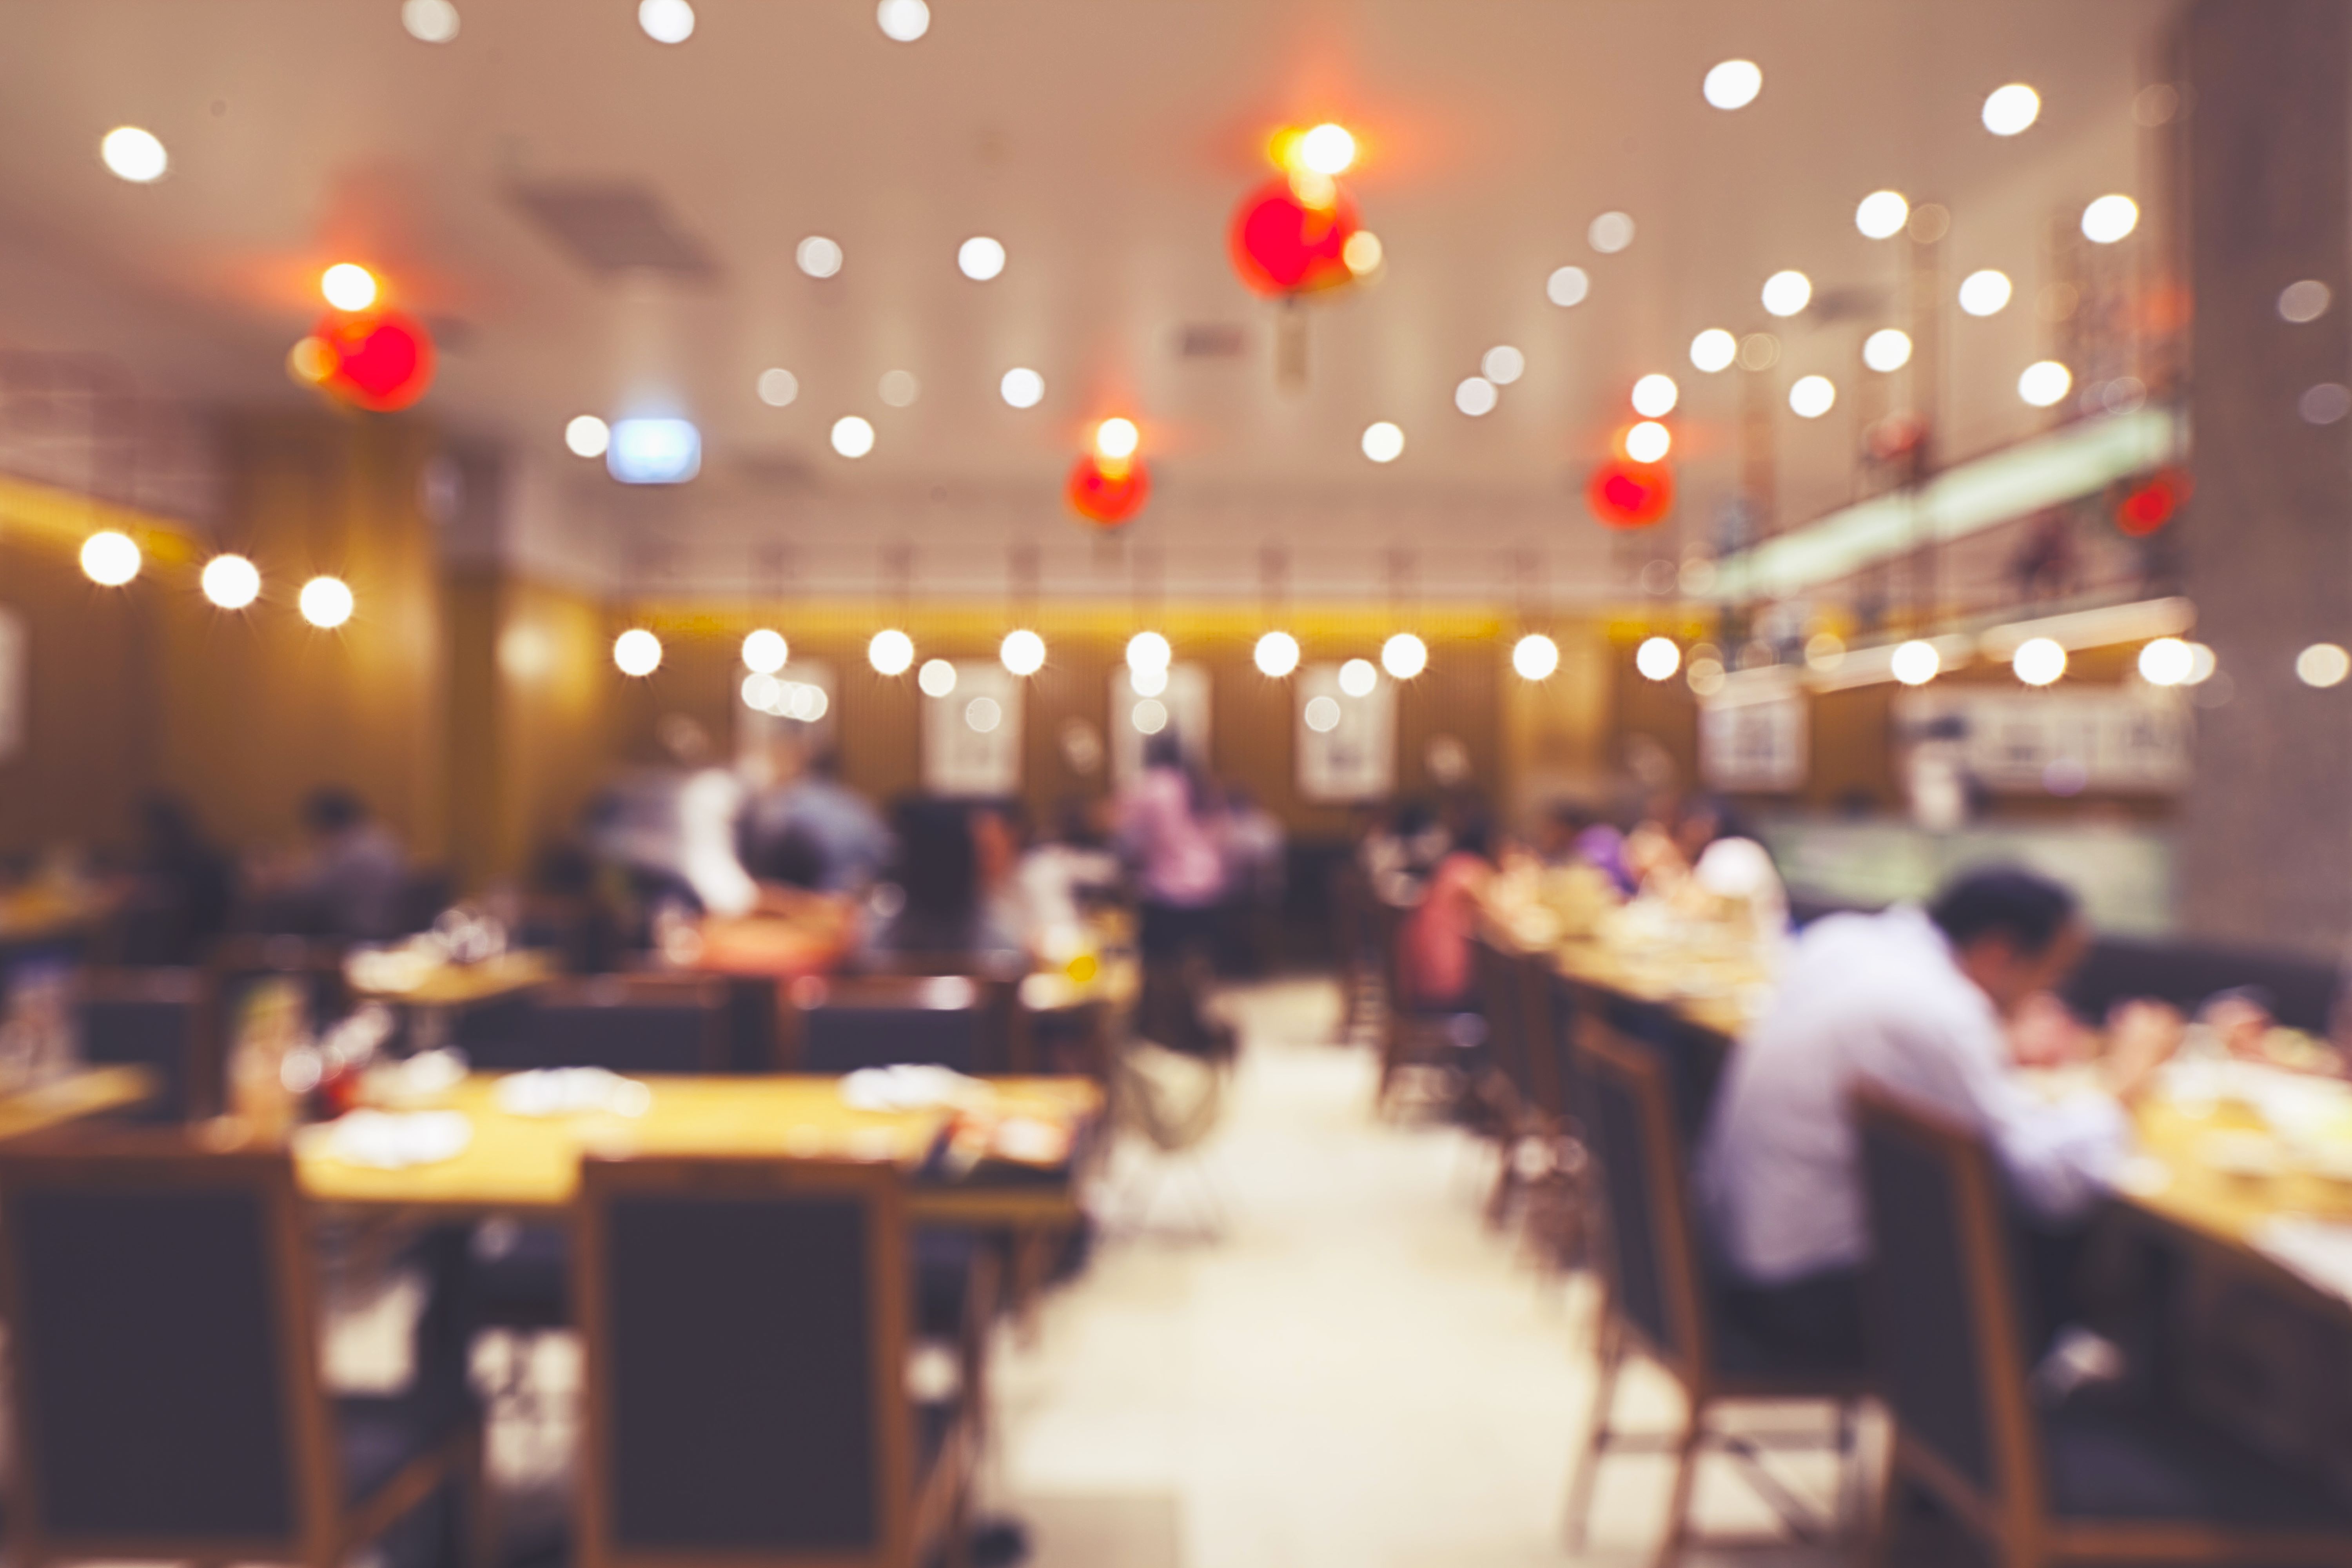 How SpaceSight Improved Inspection Efficiency for Chain Restaurants